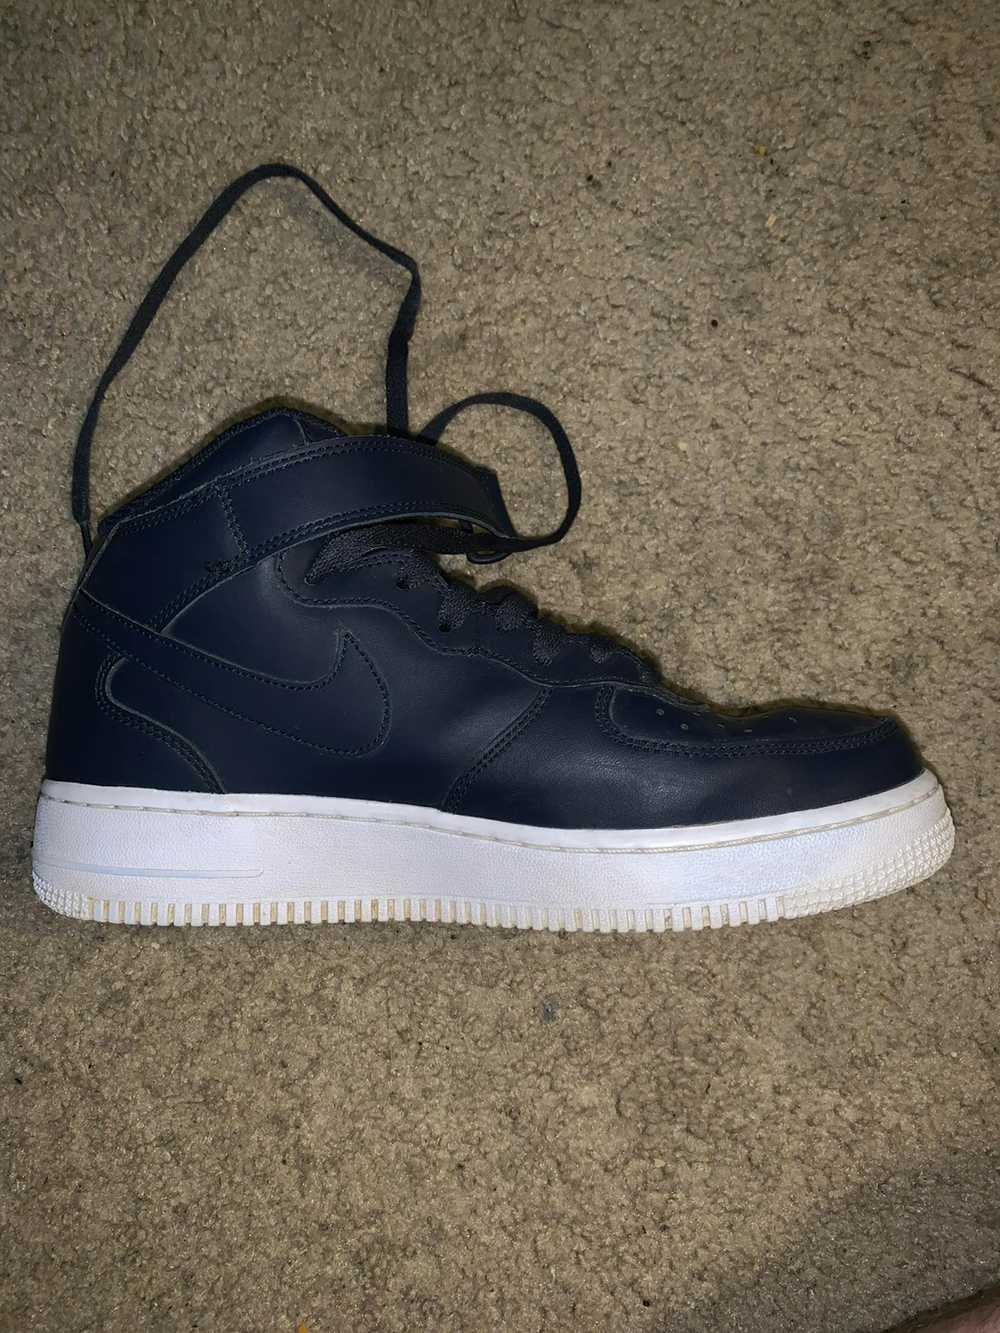 Nike Air Force 1 Mid - image 3